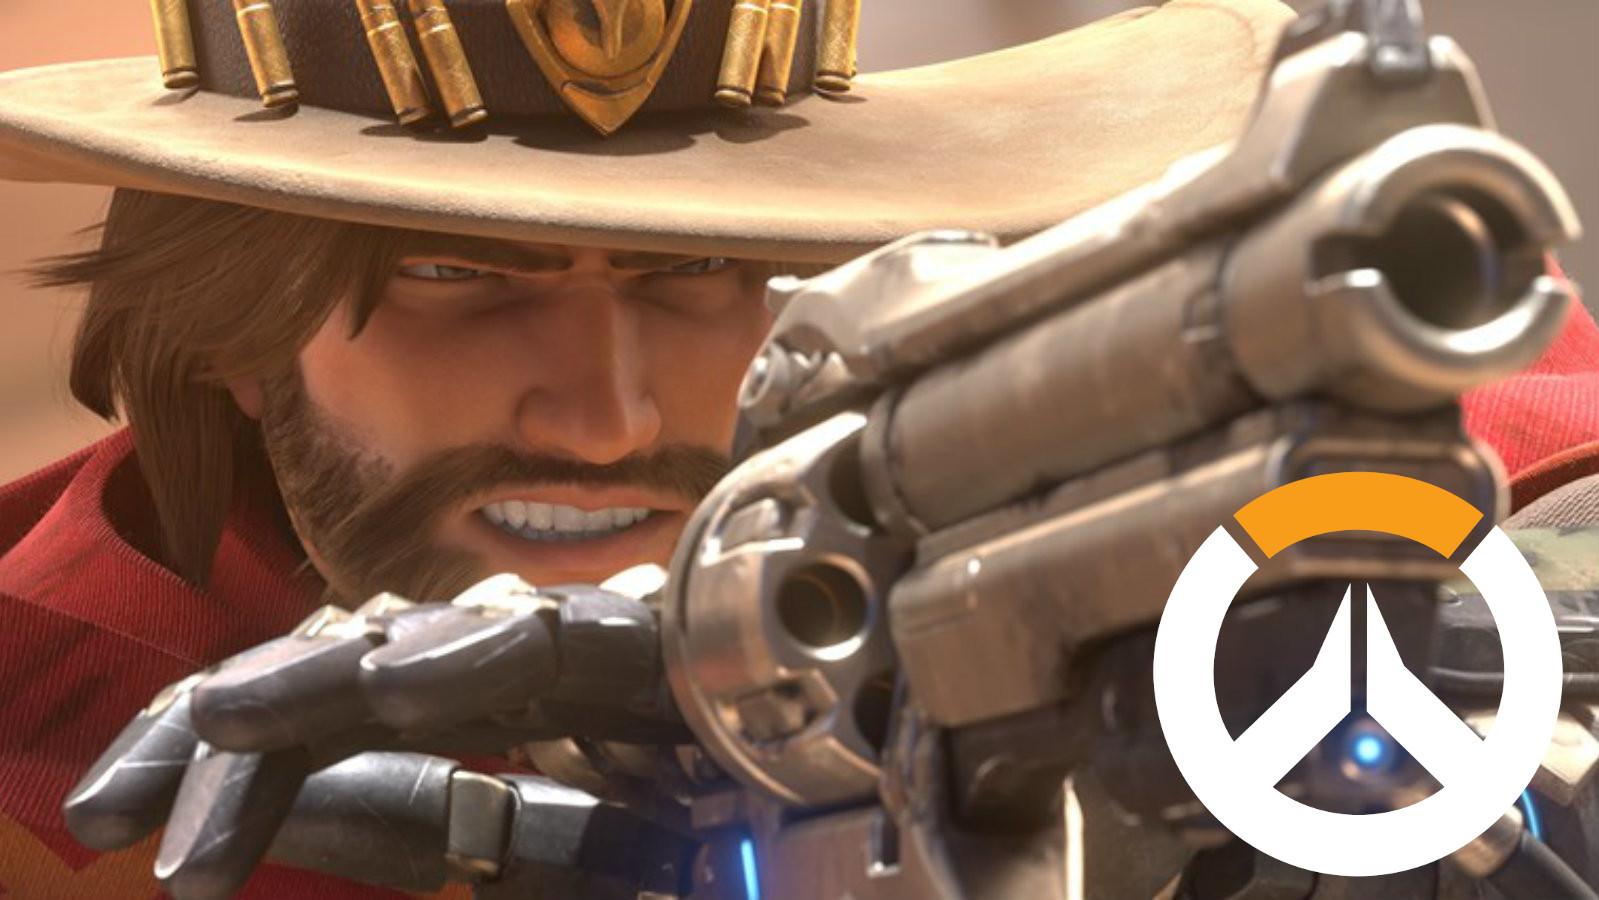 McCree fires his six-shooter